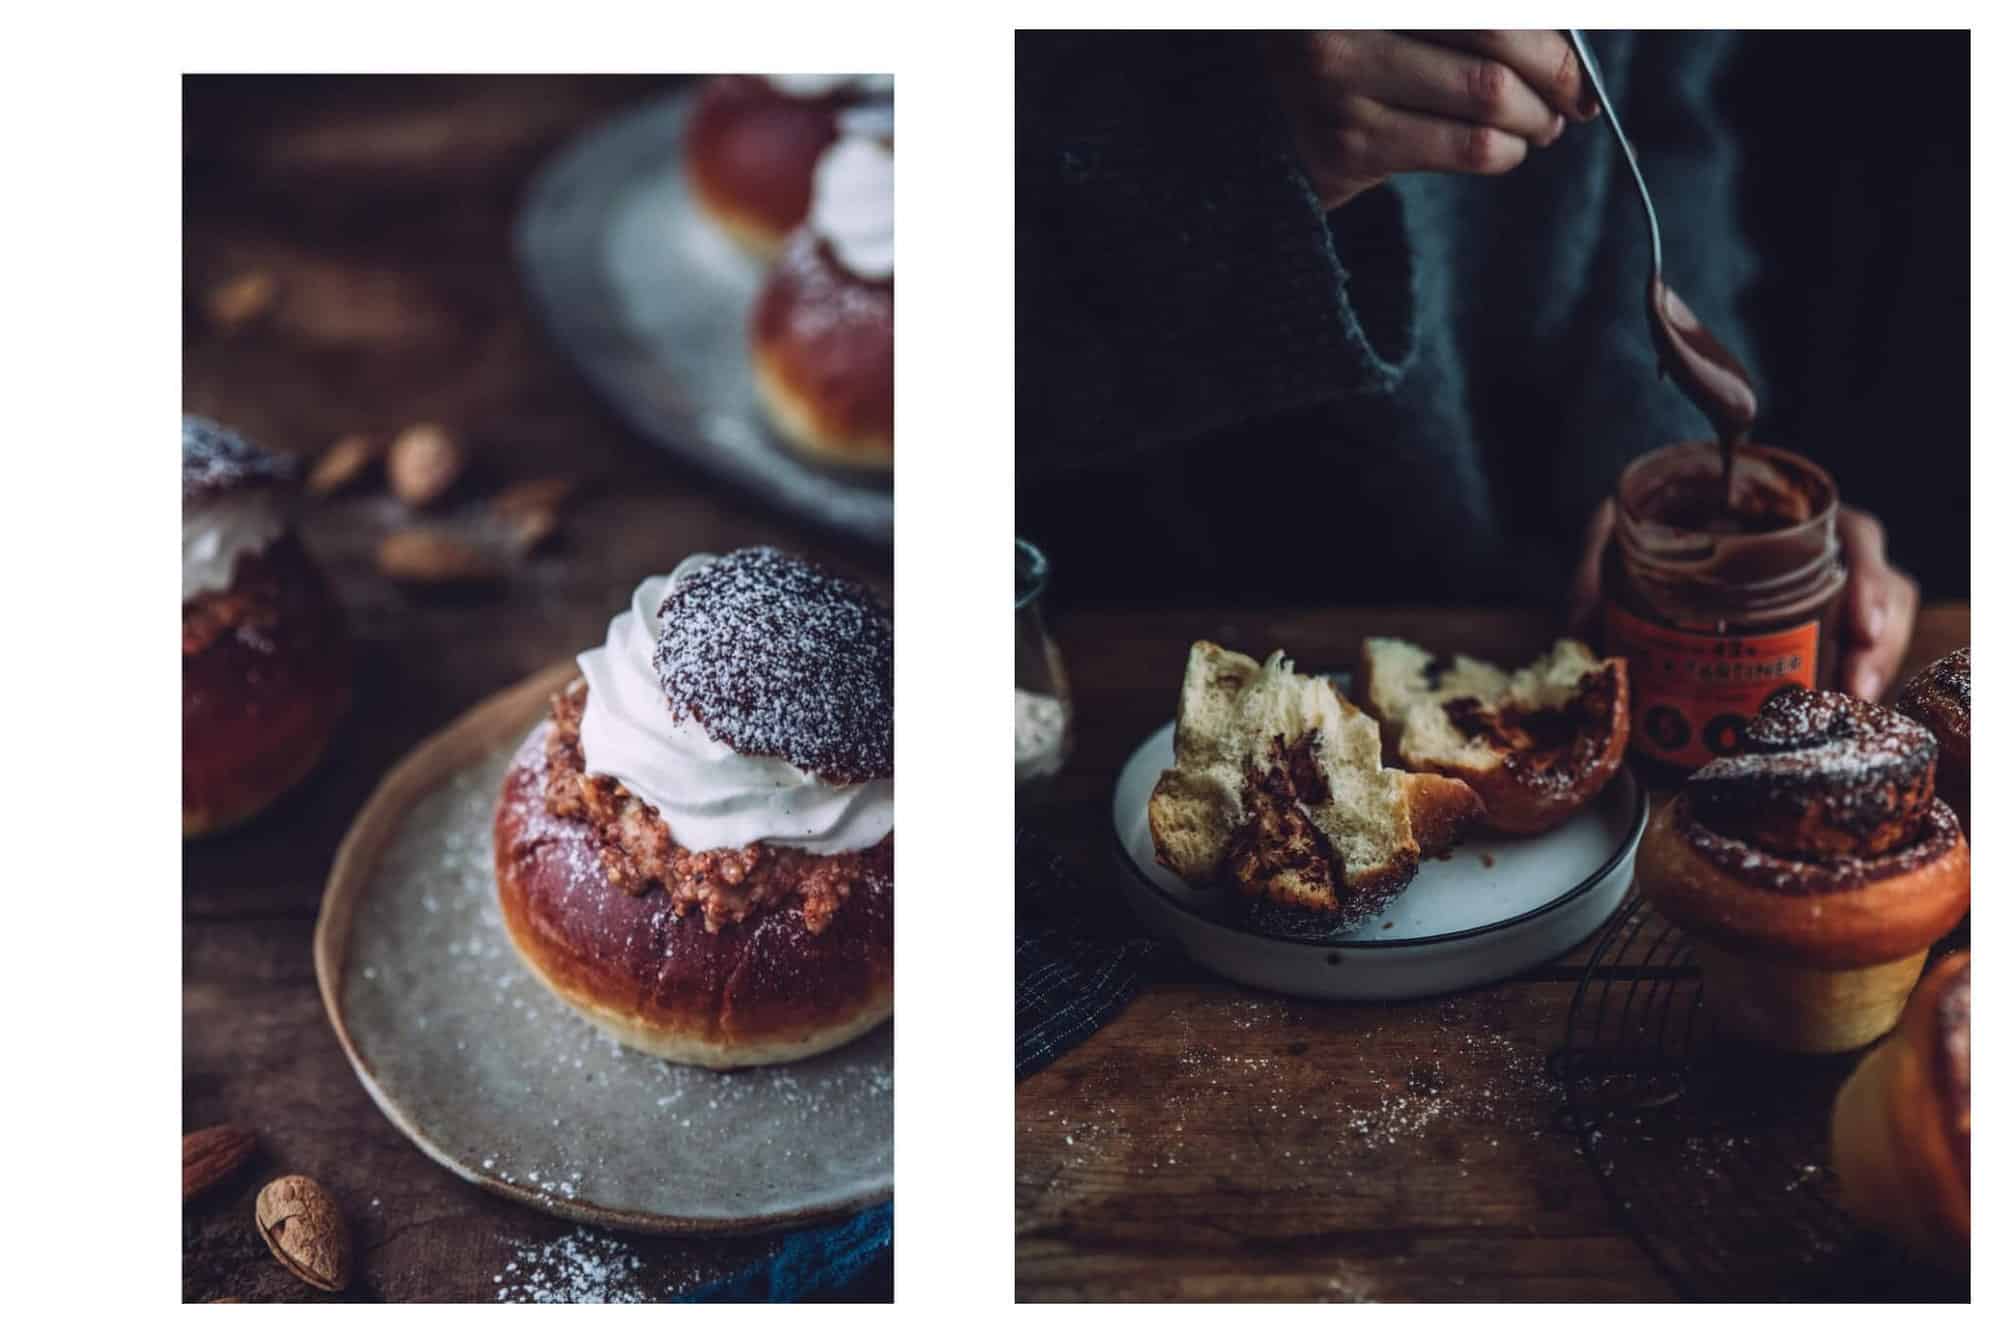 Left: An intact brioche is pictured on a plate. It’s topped with cream, chocolate, and icing sugar.  Right: A brioche has been broken open, with someone taking a spoonful of a chocolate spread to place inside. 